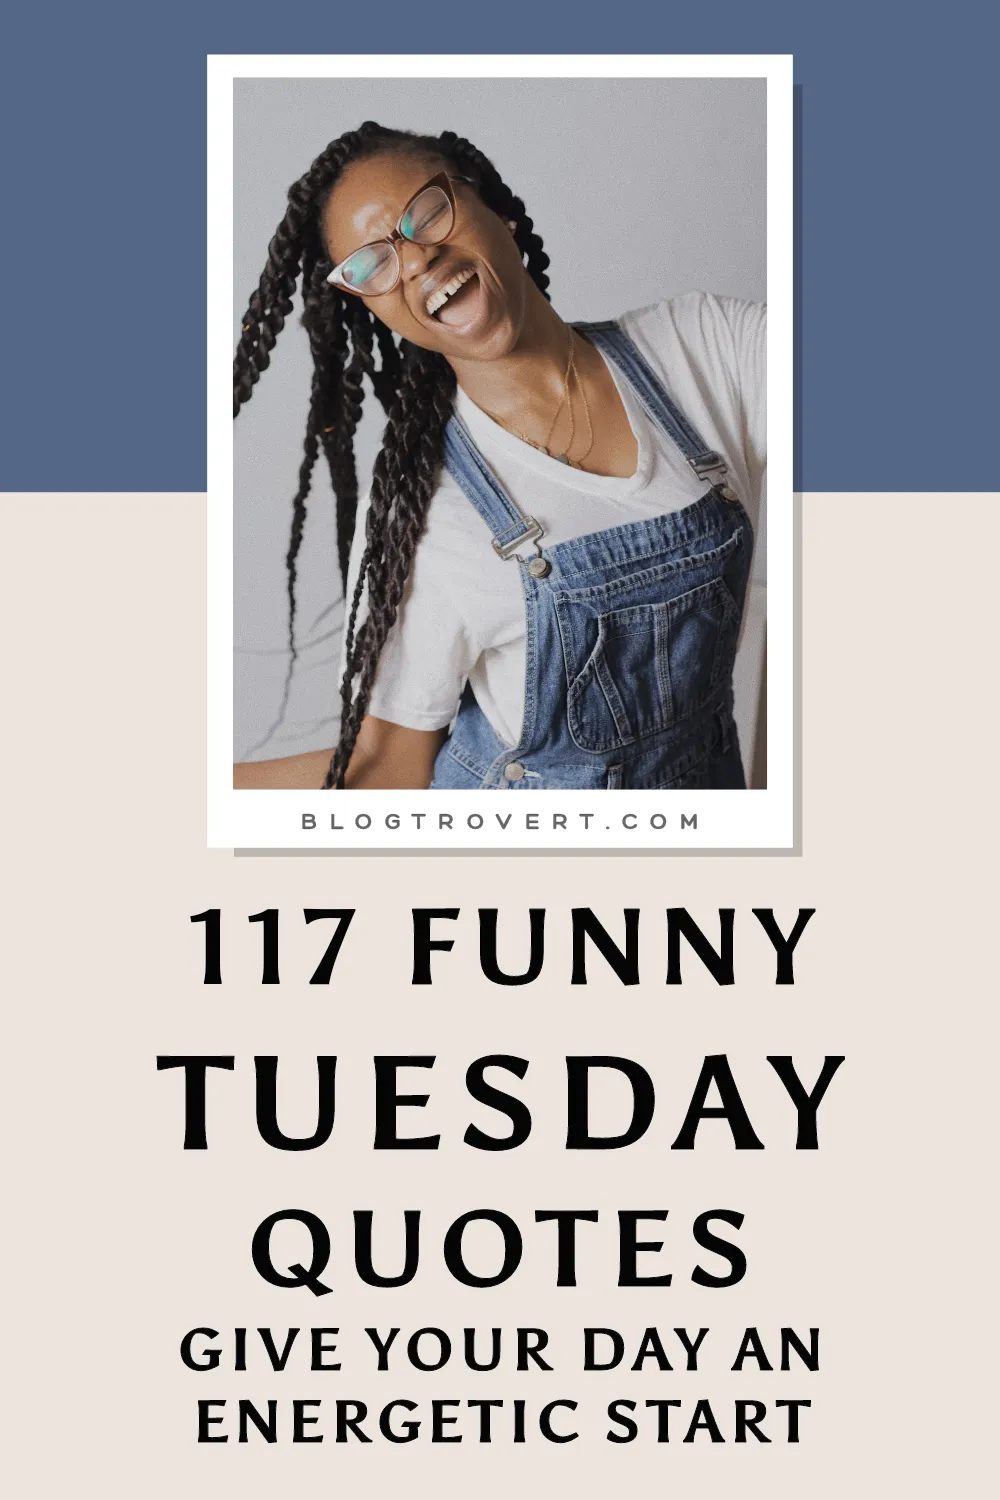 117 Funny Tuesday Quotes to Brighten Your Day 3